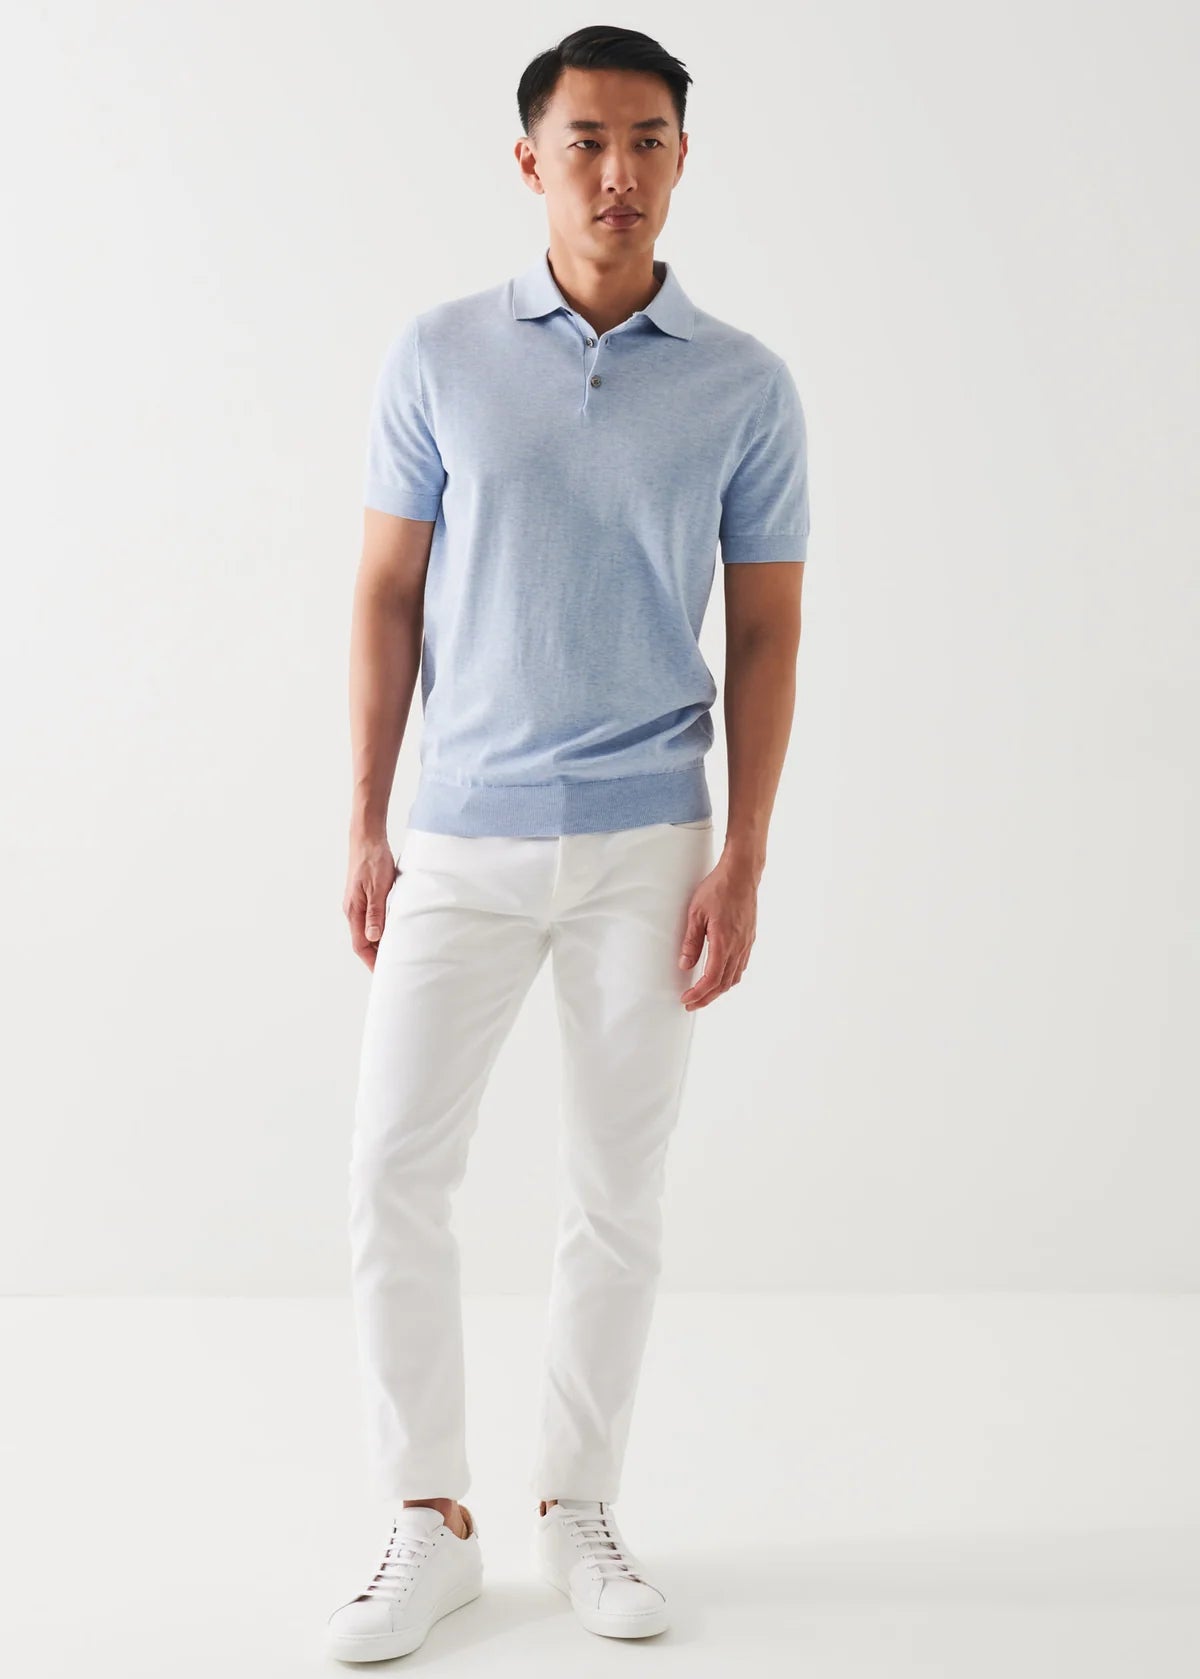 Patrick Assaraf Cotton Cupro Polo in Blue Bell